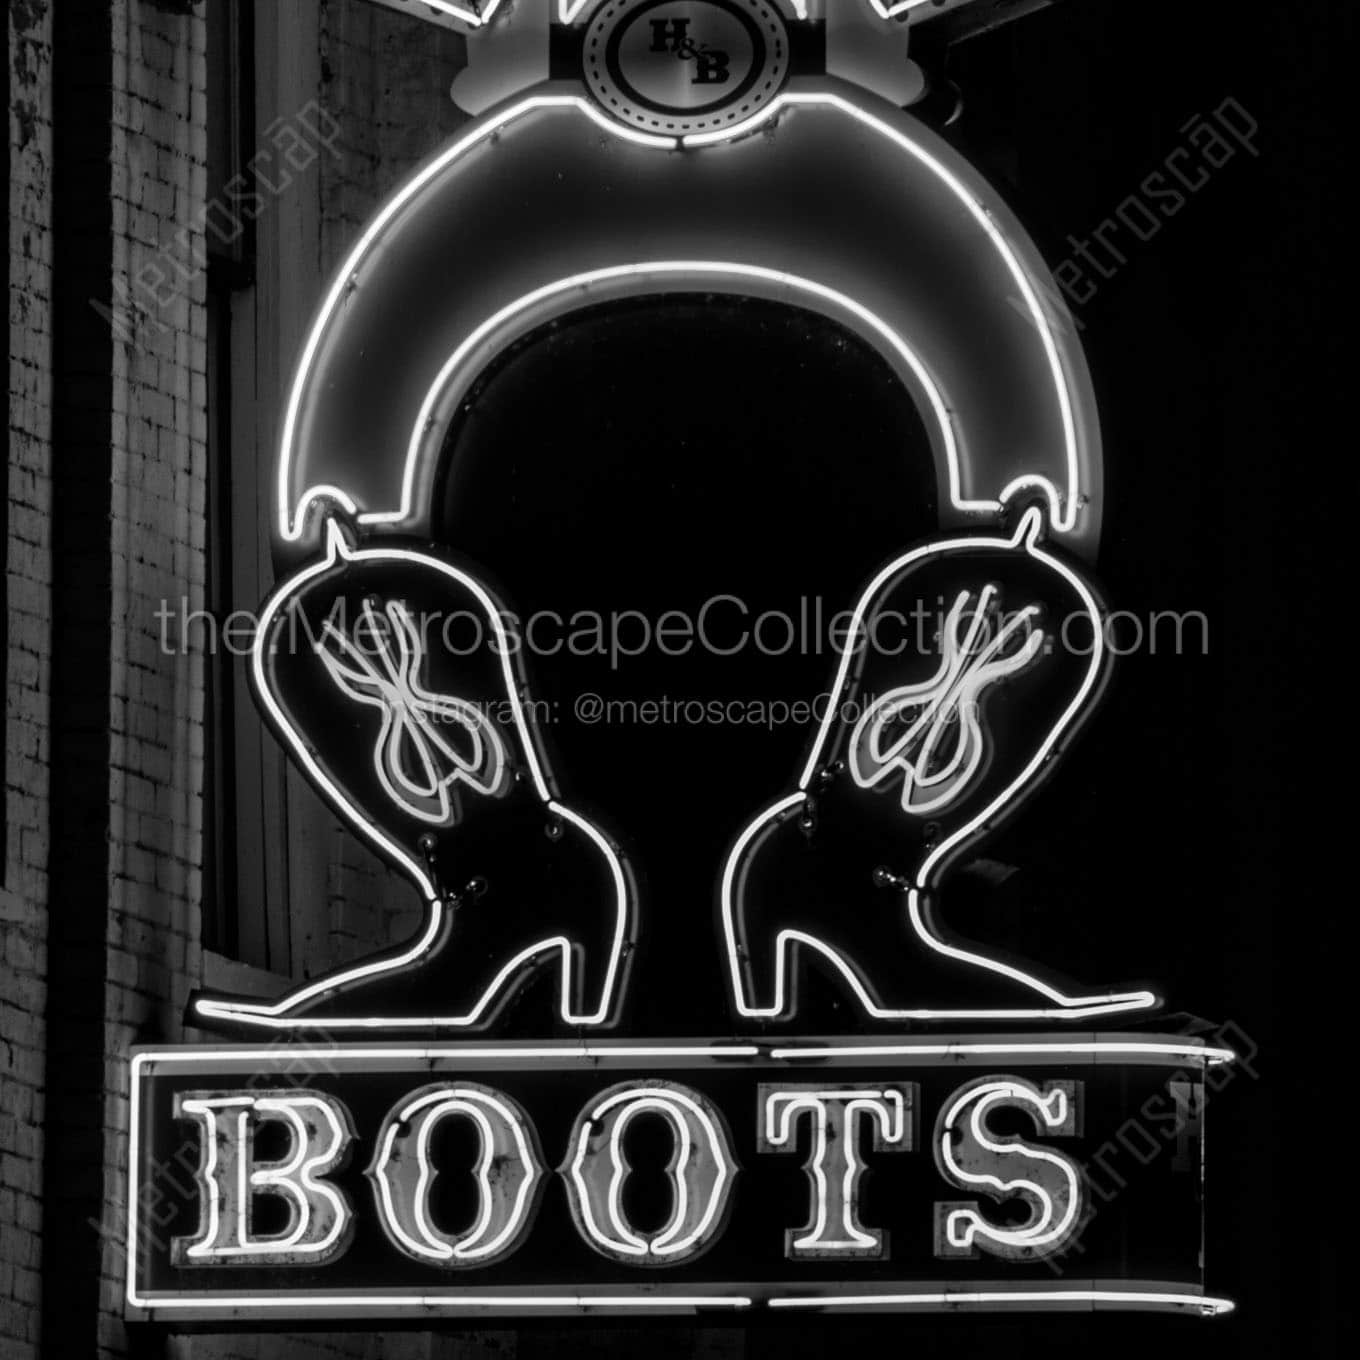 hats and boots neon sign Black & White Wall Art